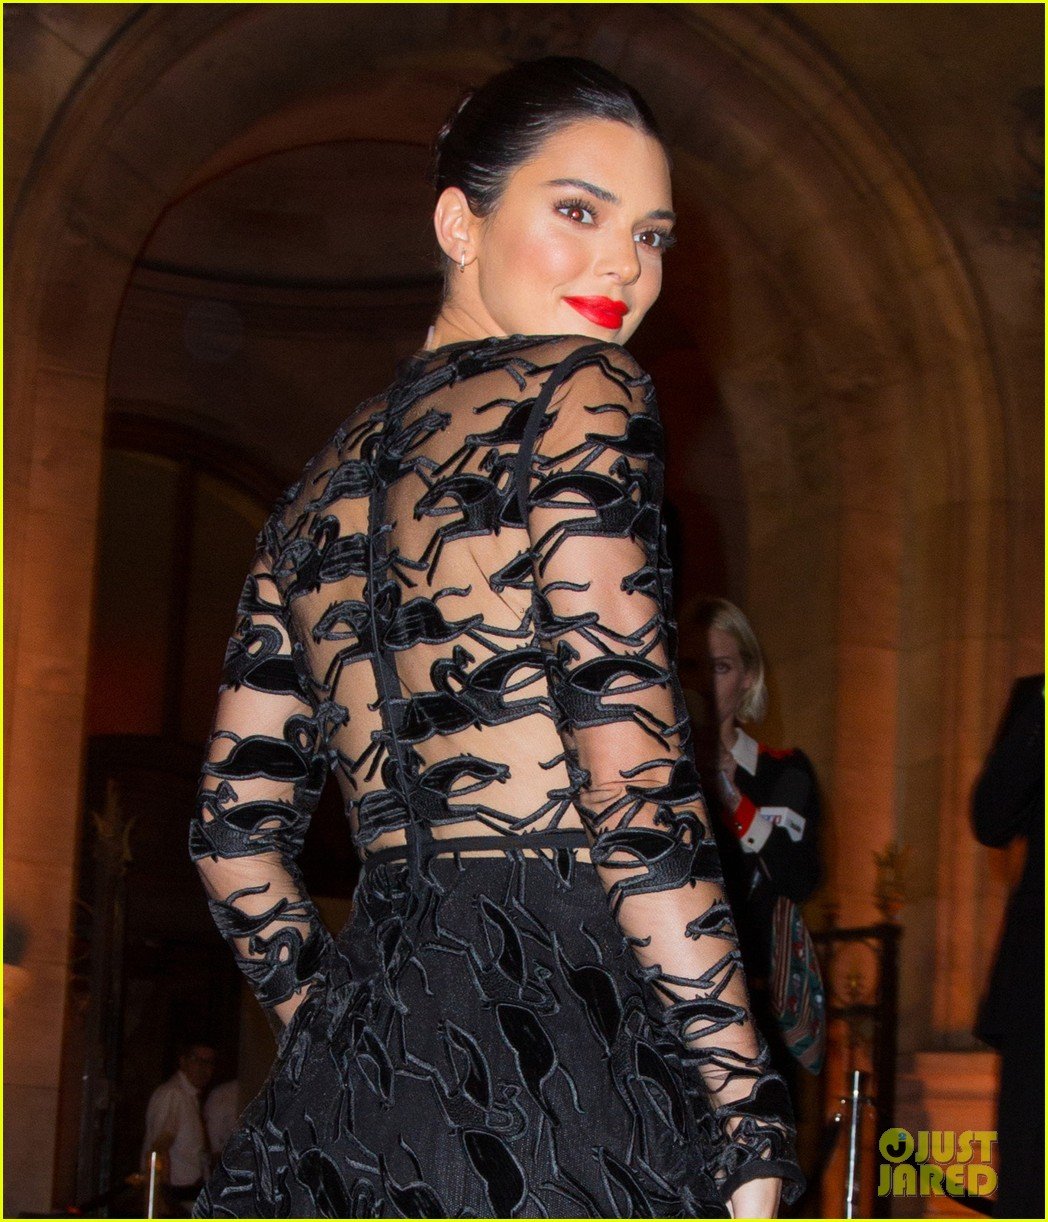 kendall jenner wears sheer dress for an event in paris 06